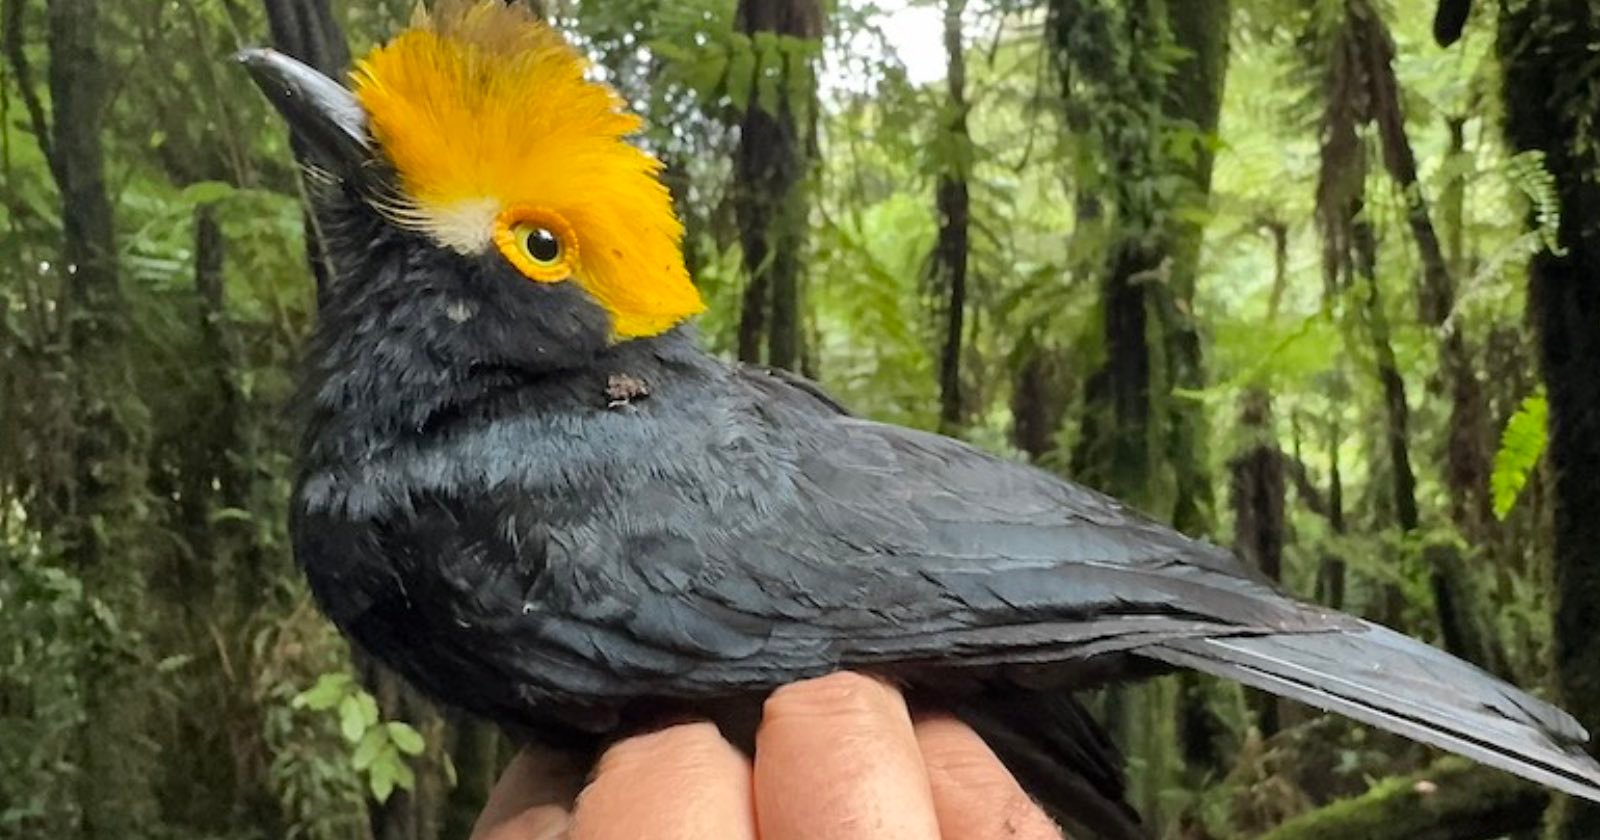  stunning lost bird species photographed first time 